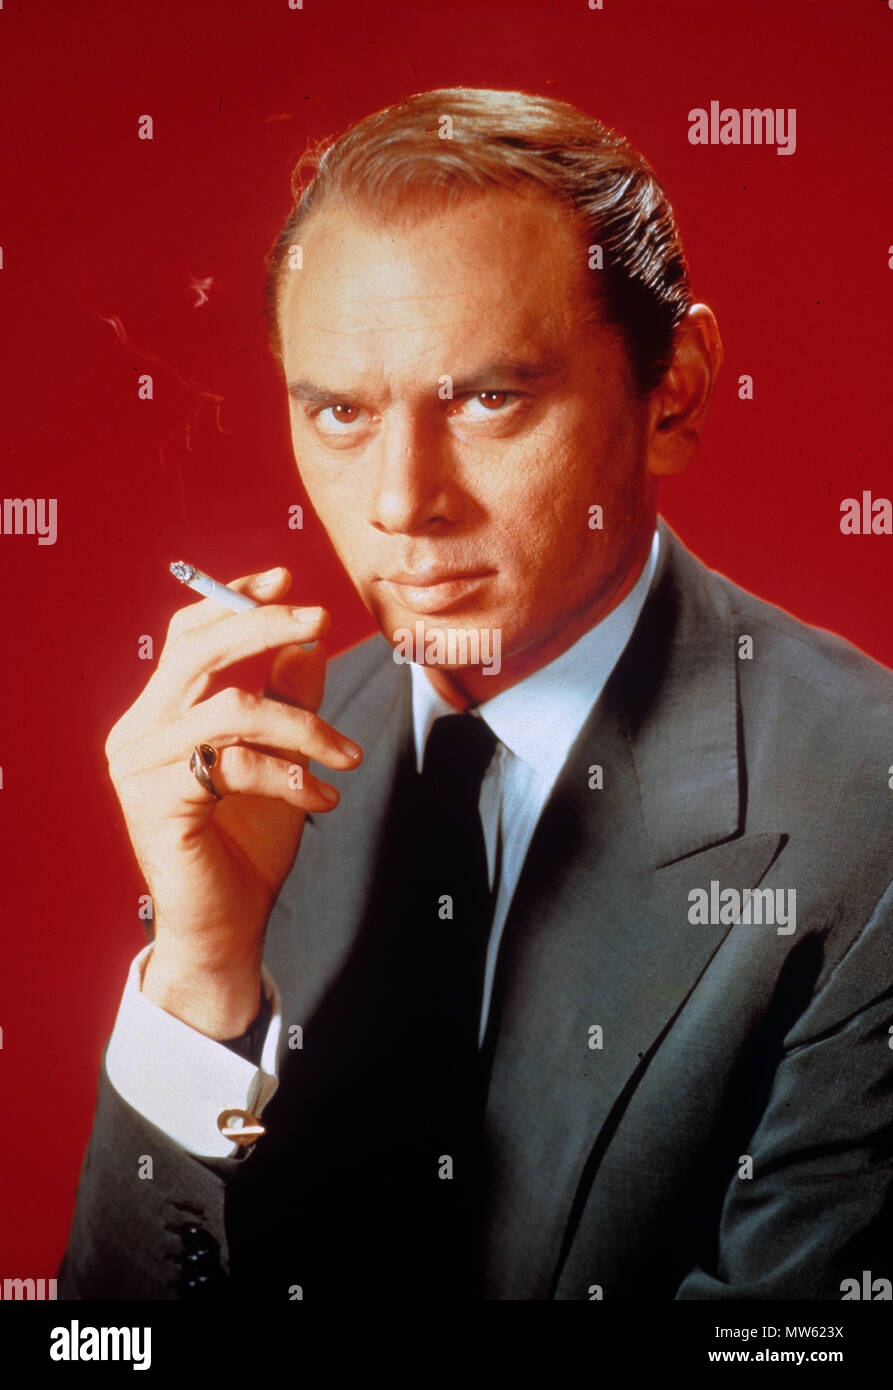 YUL BRYNNER (1920-1985) Russian-American film actor about 1955 Stock Photo